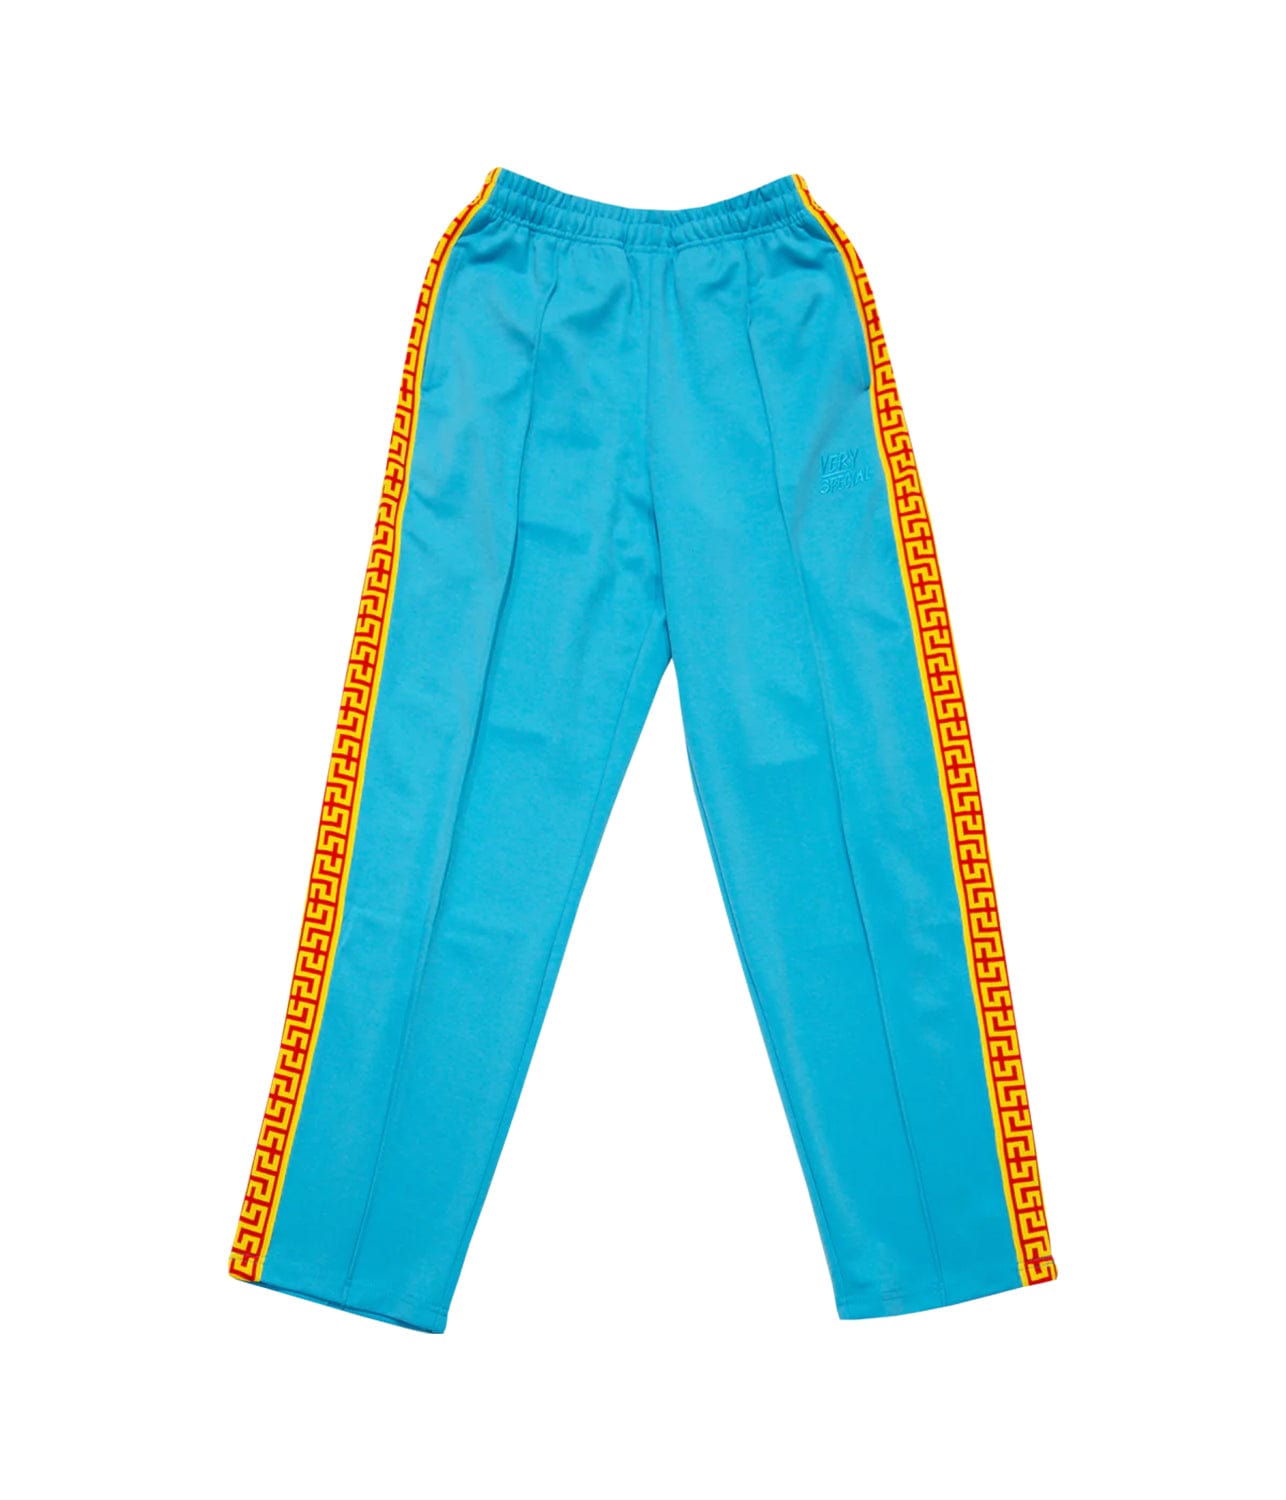 GEO TRACK PANT- BLUE | SOMETHING VERY SPECIAL |  SOMETHING VERY SPECIAL GEO TRACK PANT- BLUE